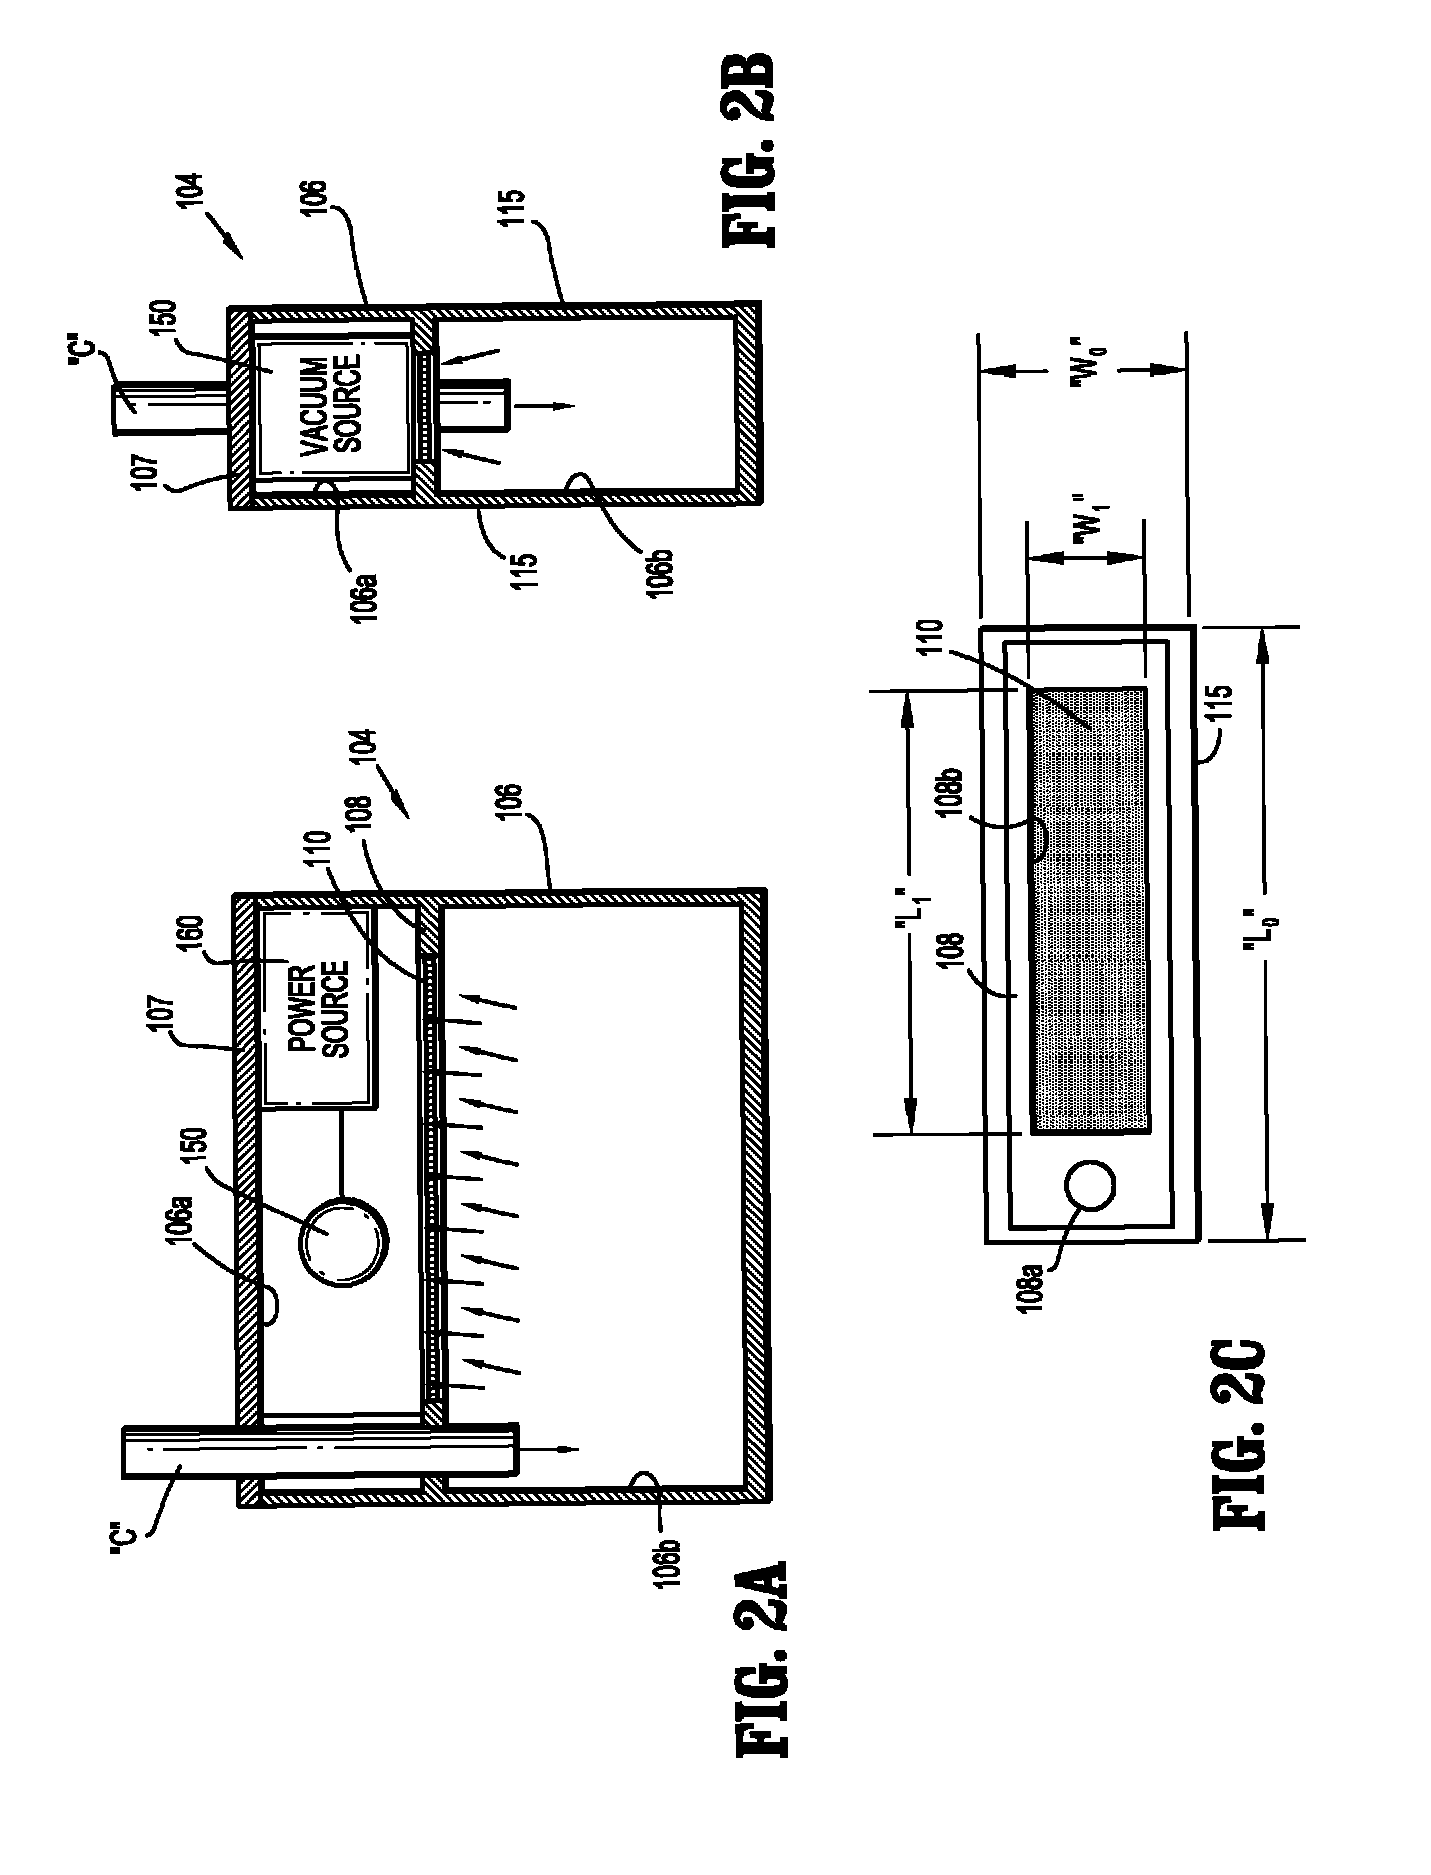 Canister membrane for wound therapy system